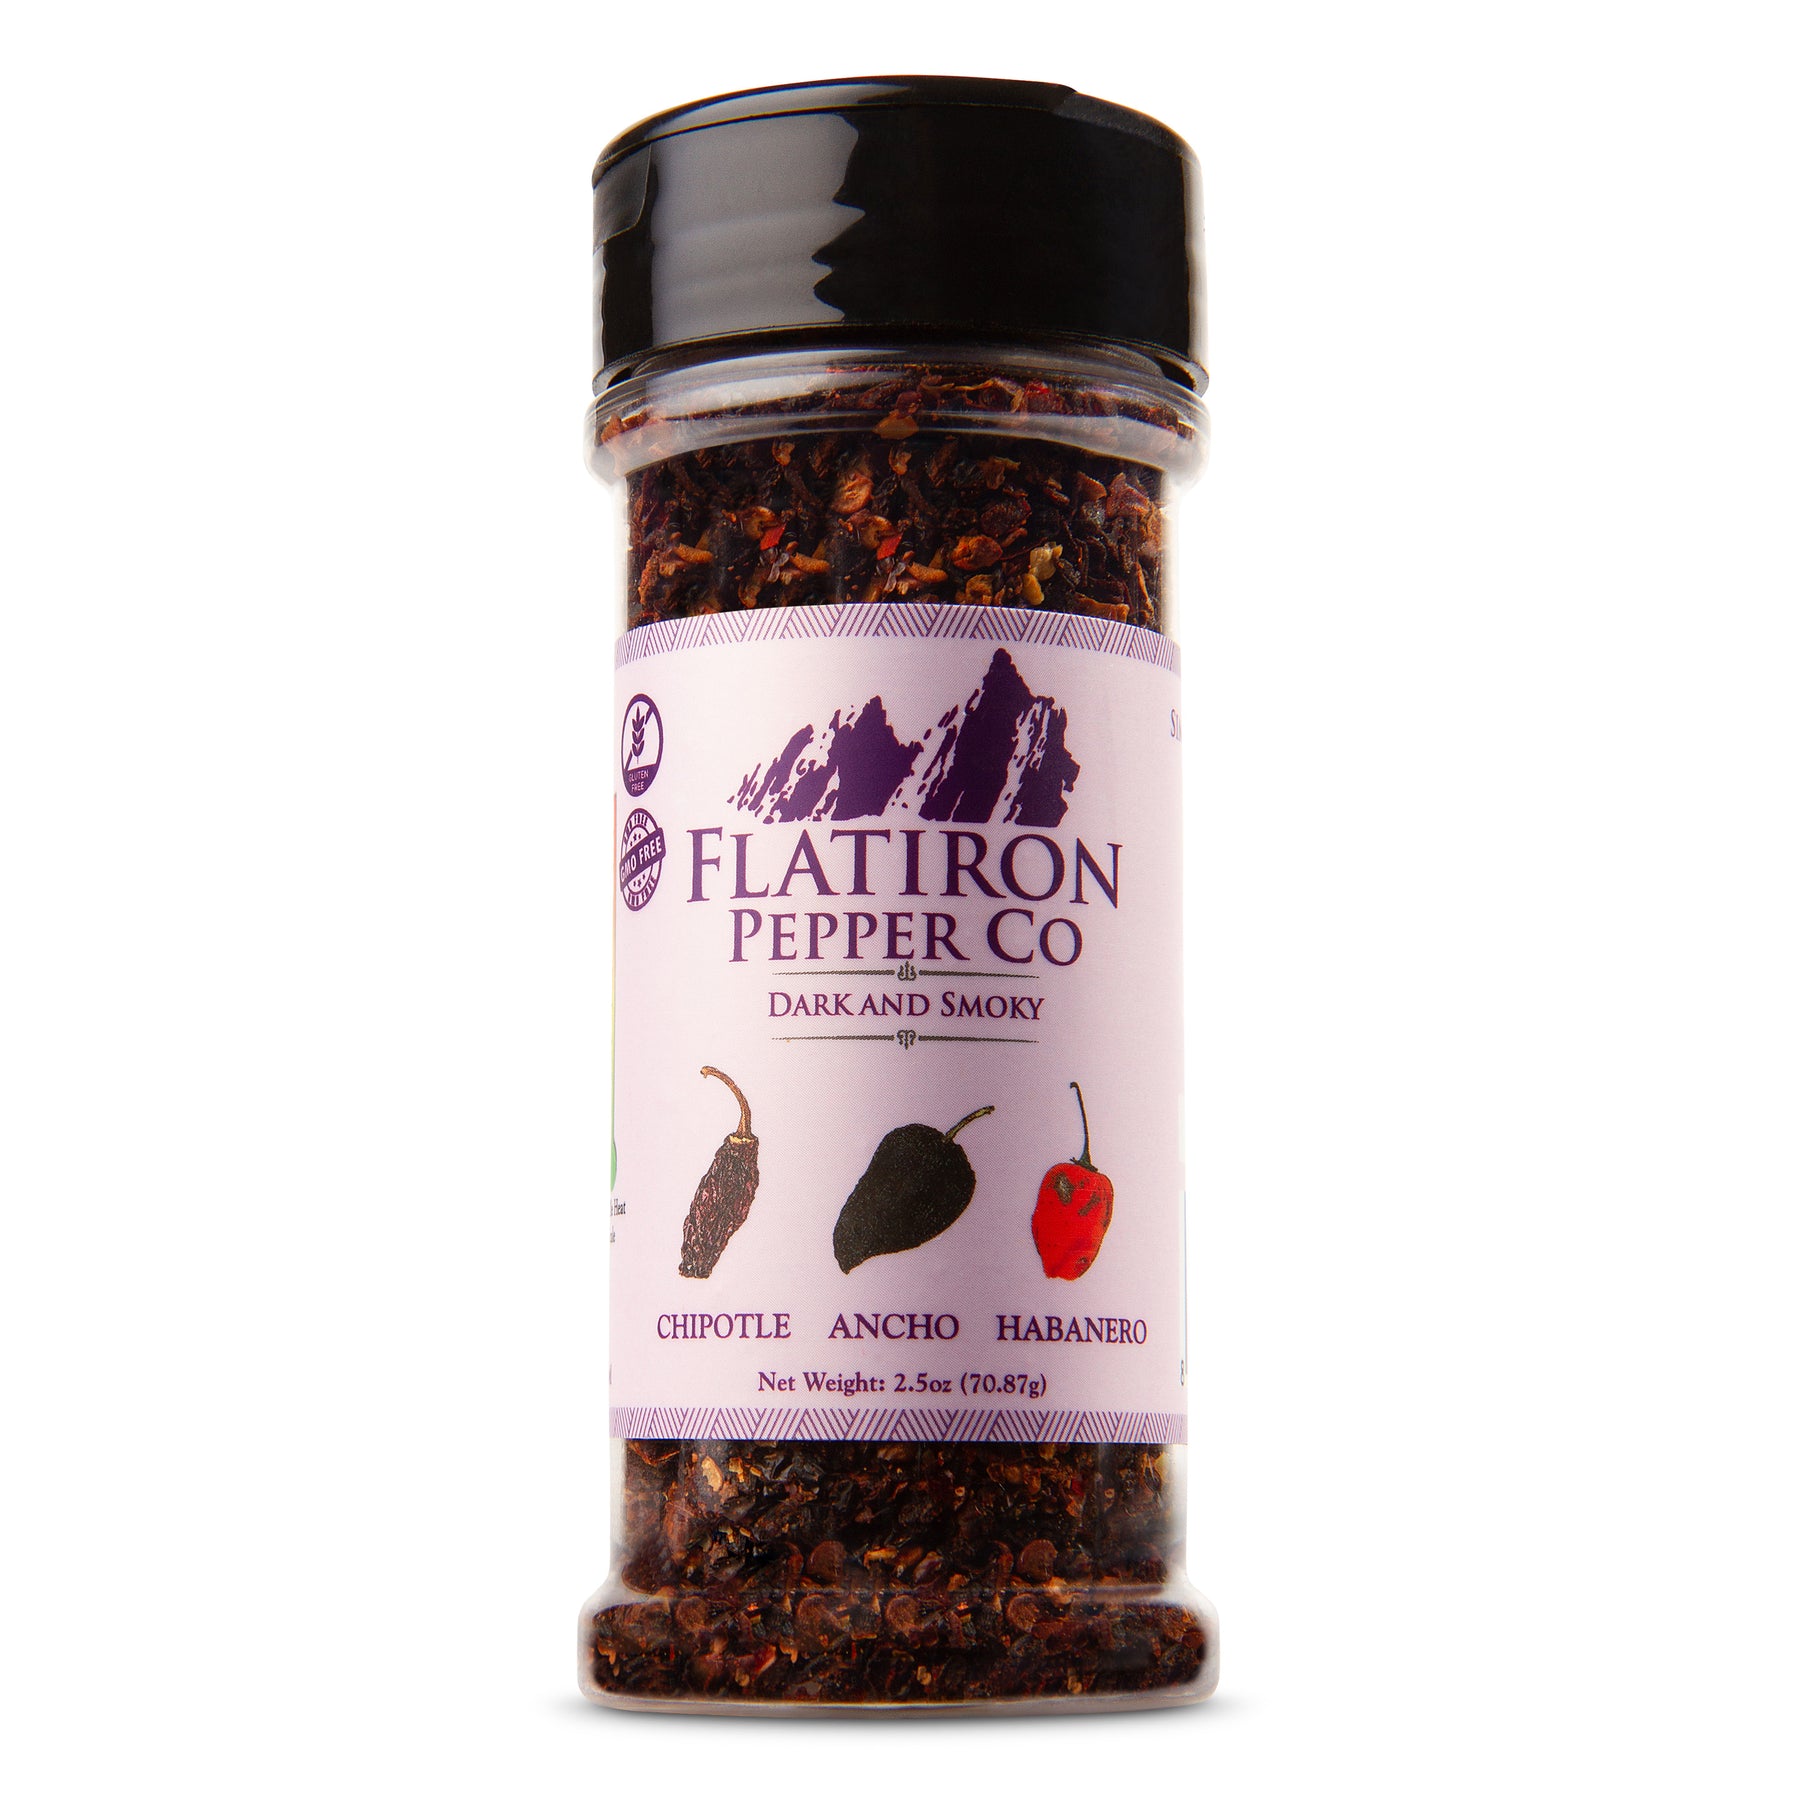  Mo'Spices & Seasonings - Sweet & Spicy Chili Blend